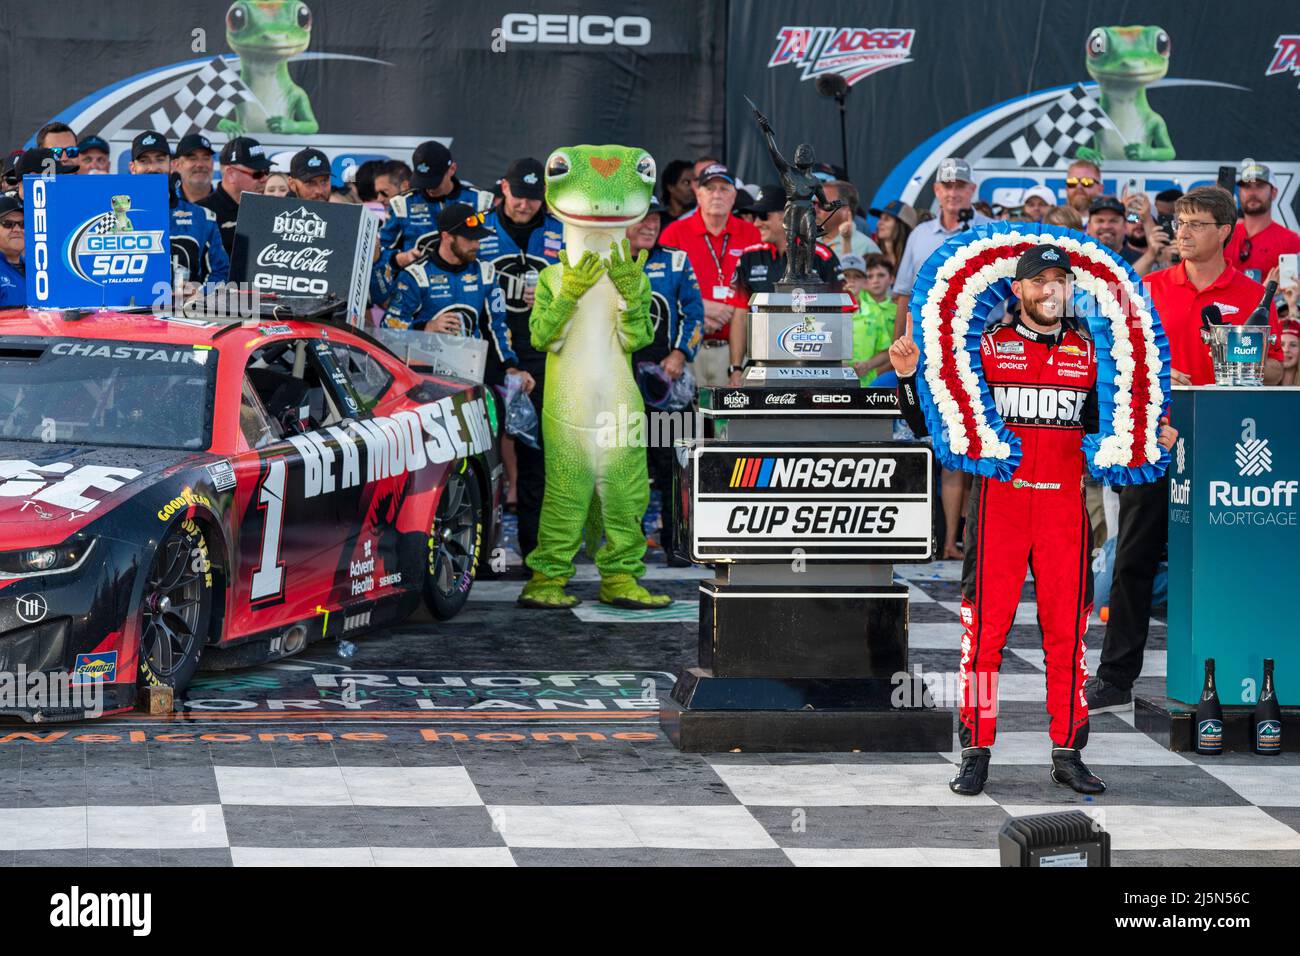 Lincoln, AL, USA. 24th Apr, 2022. Ross Chastain wins the GEICO 500 at Talladega Superspeedway in Lincoln, AL